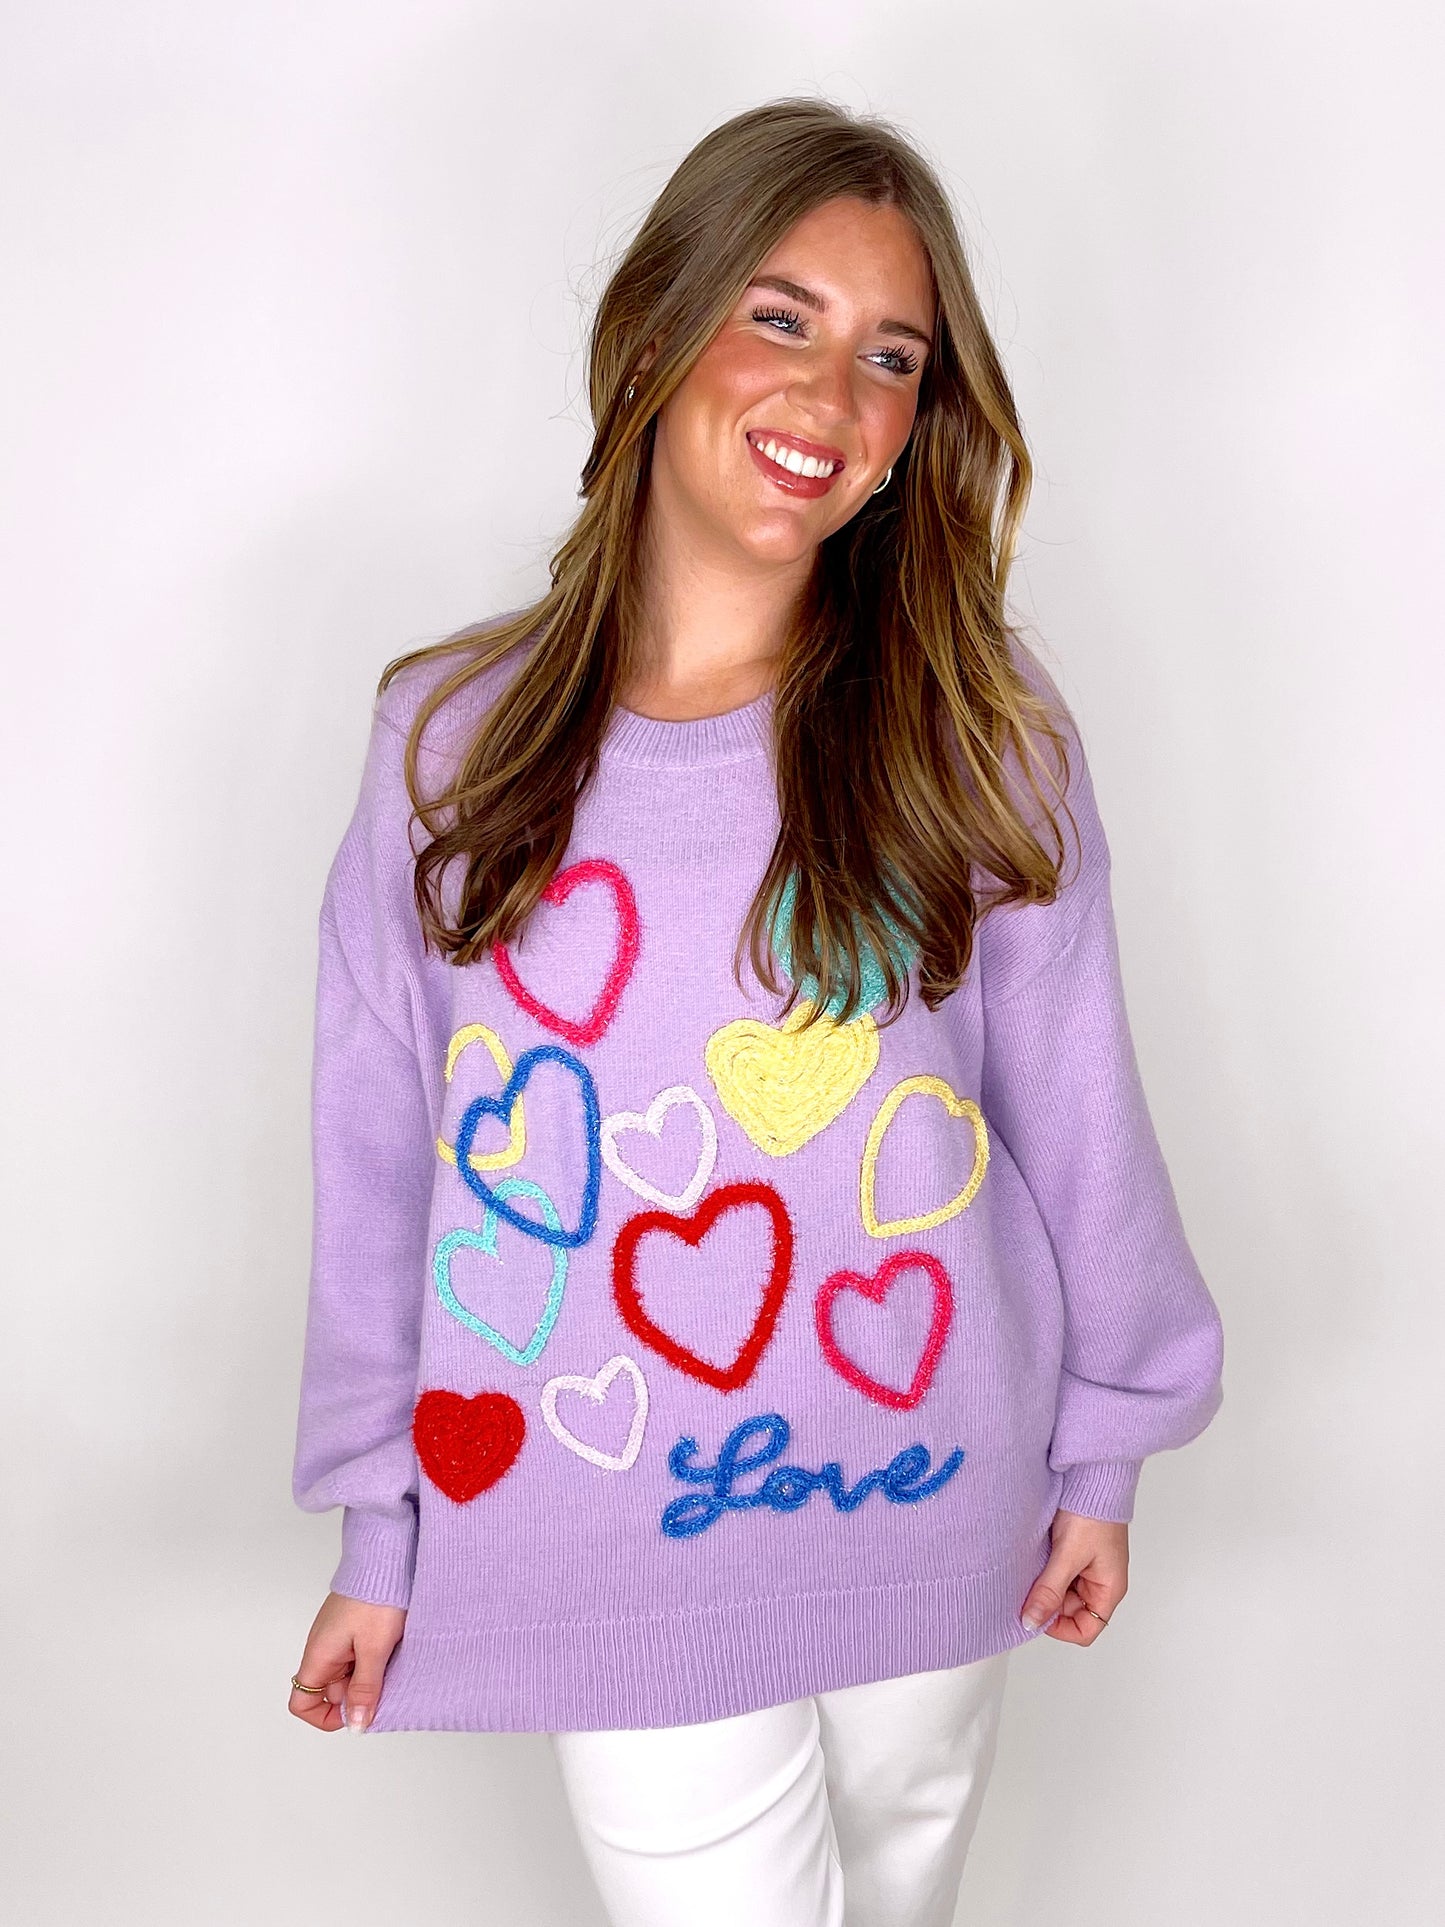 Love on the Brain Sweater-Sweaters-Entro-The Village Shoppe, Women’s Fashion Boutique, Shop Online and In Store - Located in Muscle Shoals, AL.